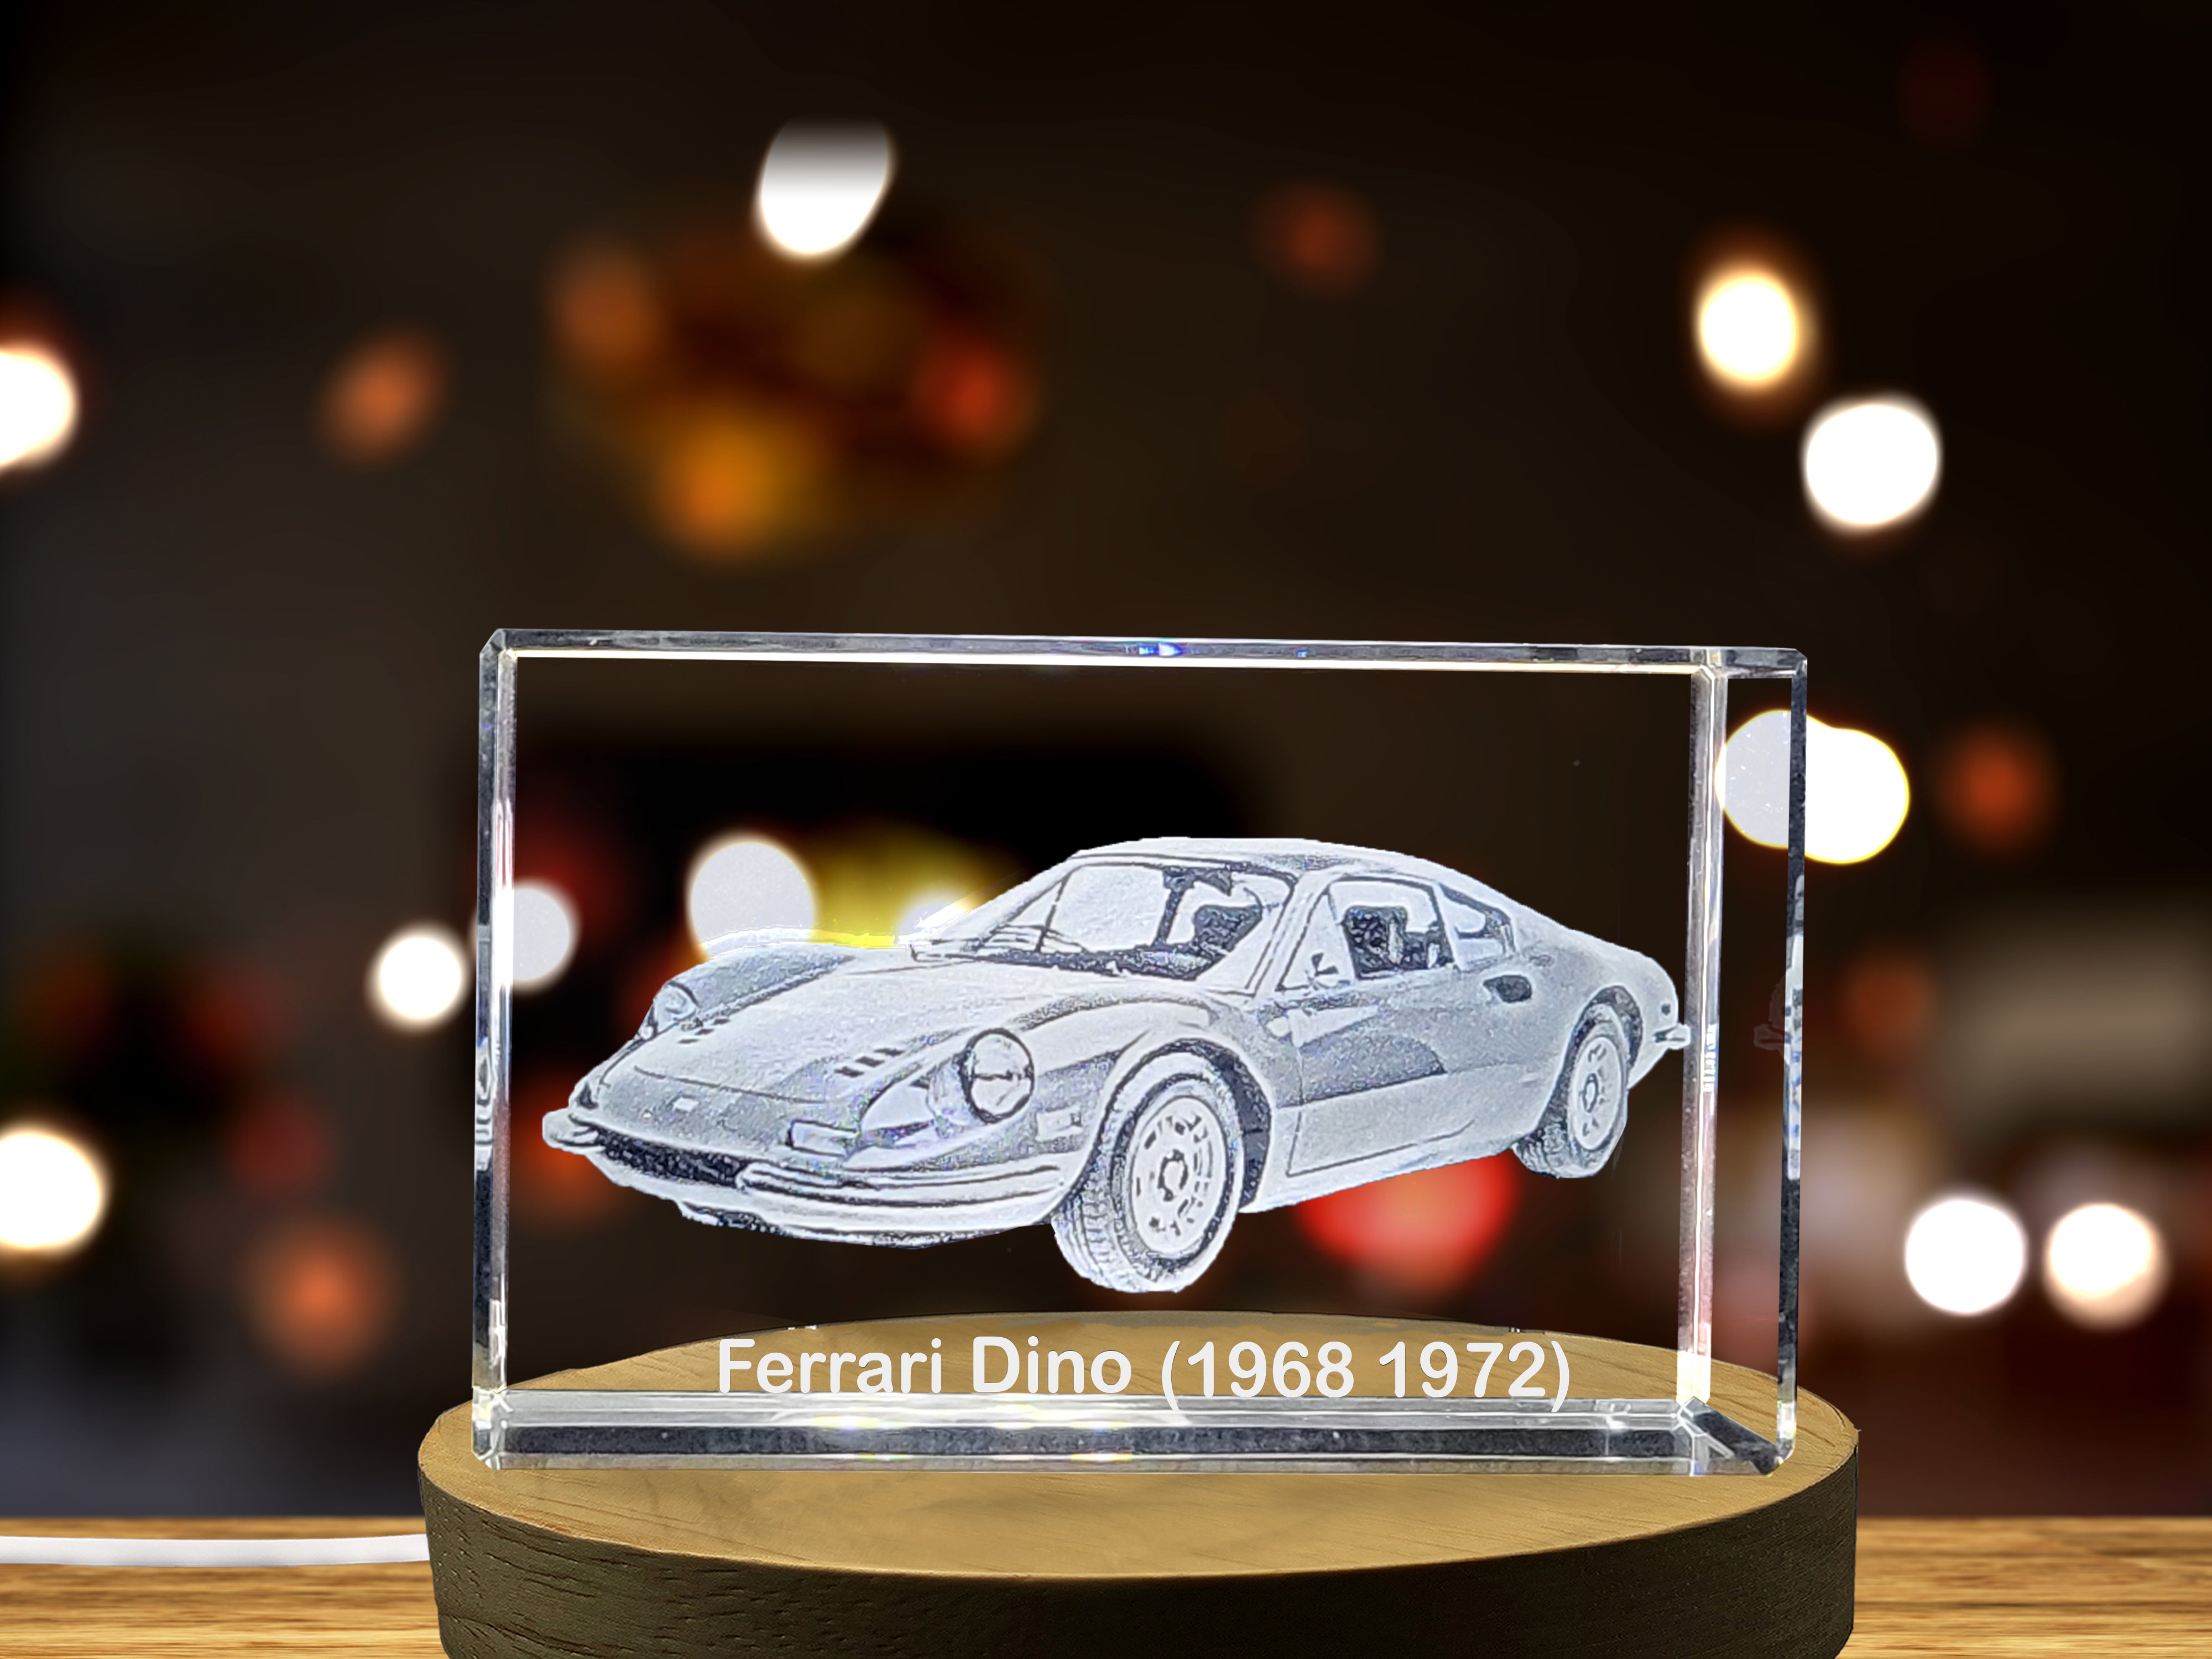 Ferrari Dino Iconic Supercar Collectible Crystal Sculpture | Stylish 1968-1972 Mid-Engine Innovation A&B Crystal Collection